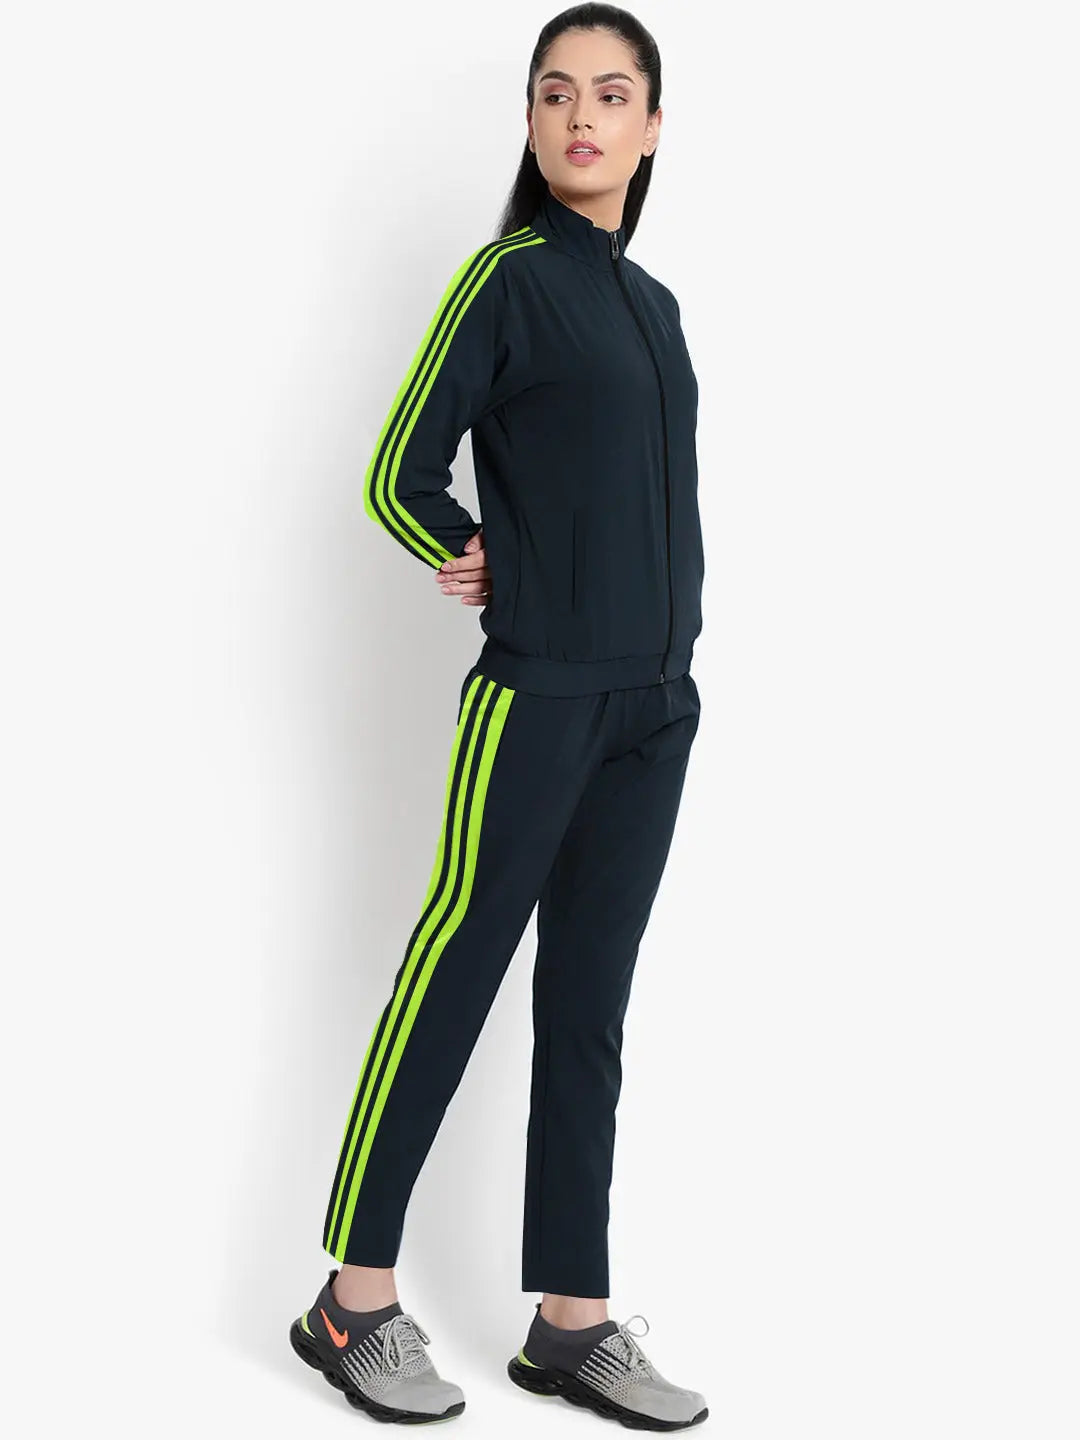 Louis Vicaci Fleece Zipper Tracksuit For Ladies-Navy with Lime Green Stripe-BE17280 Louis Vicaci